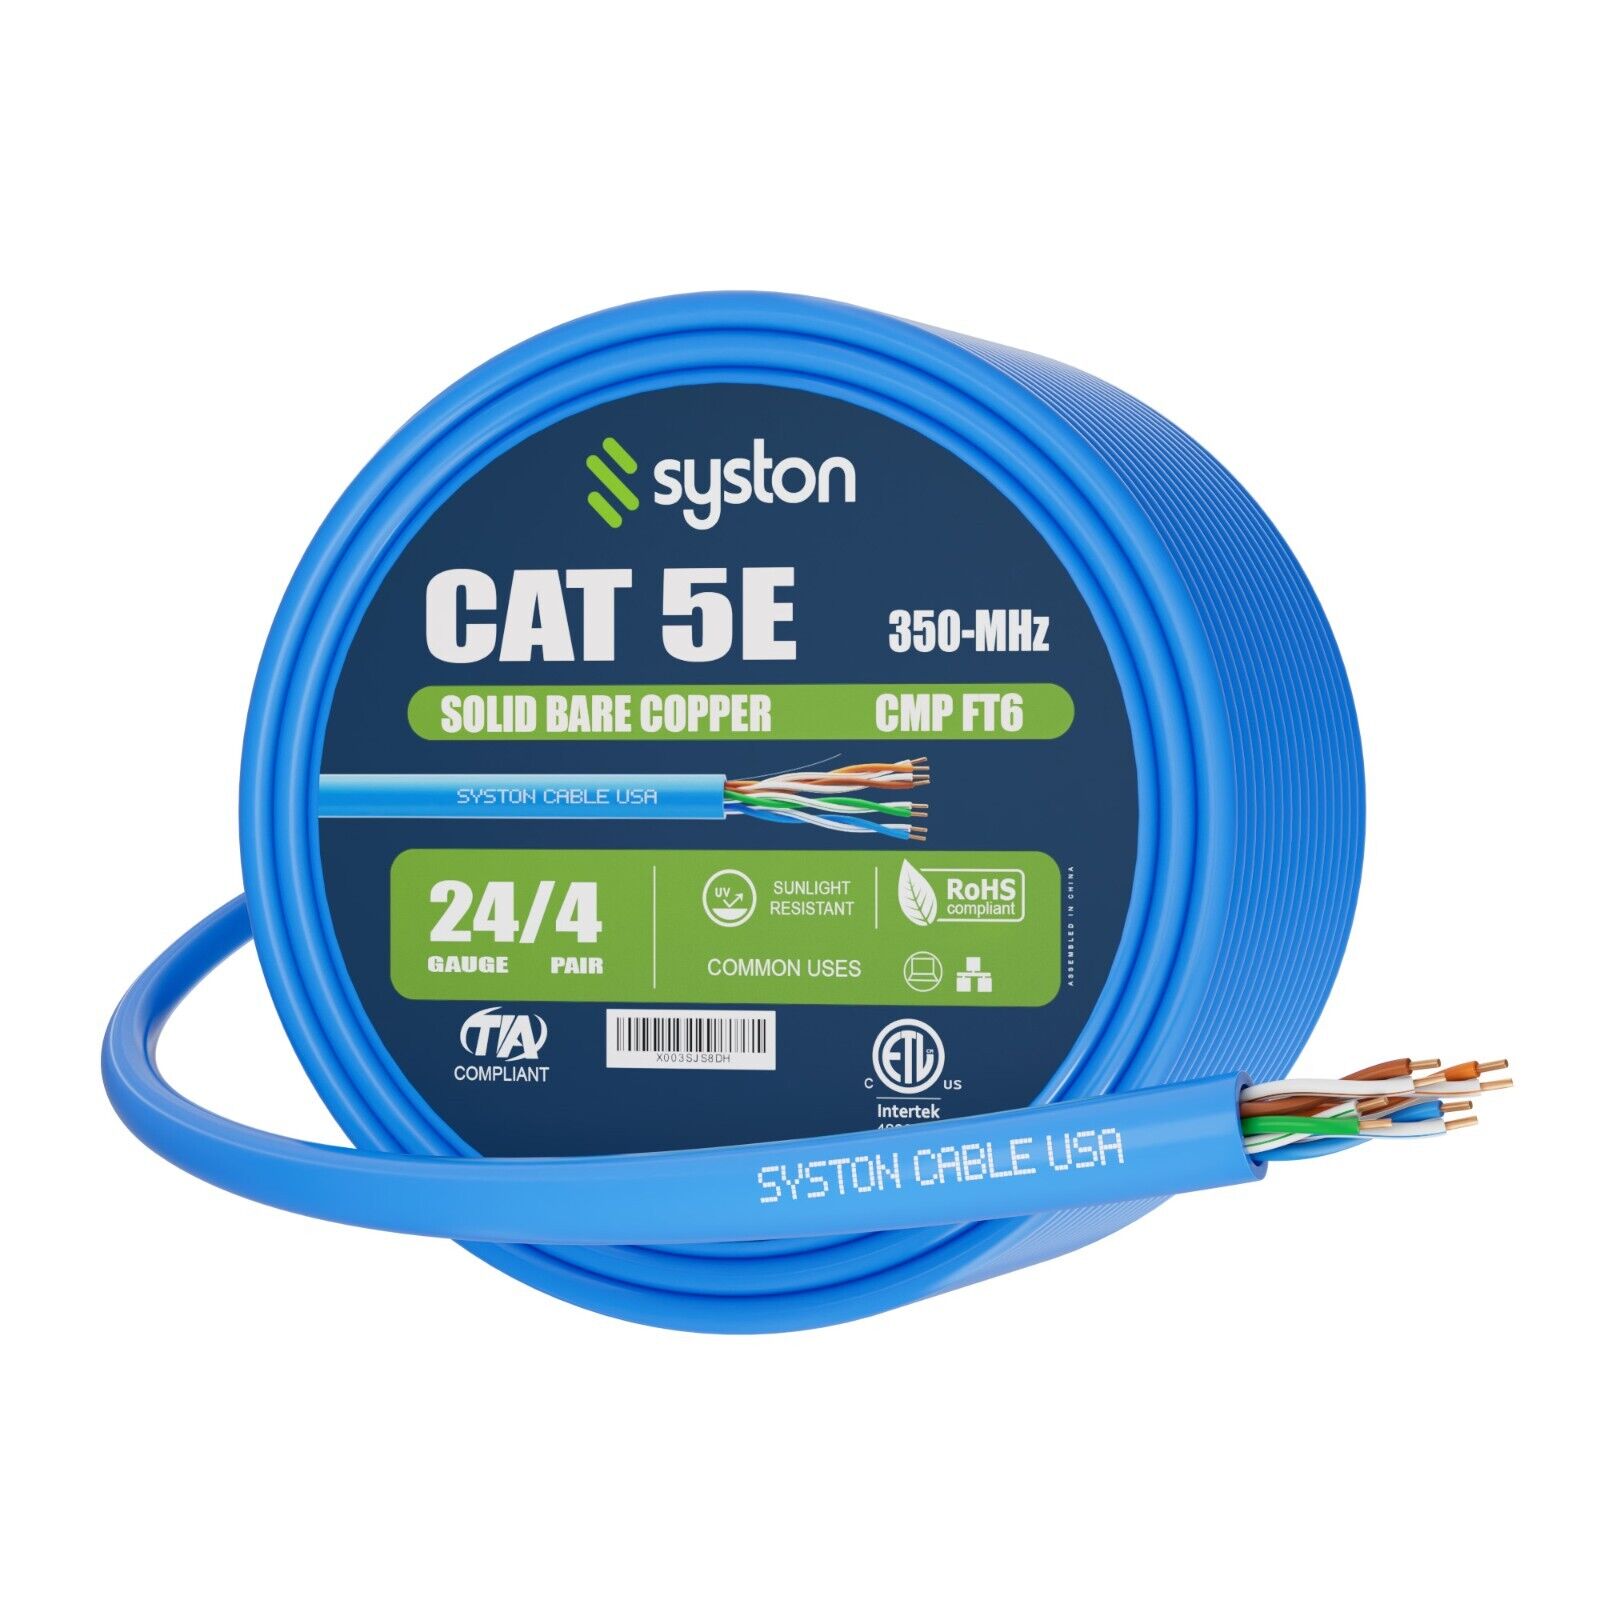 Syston Cat 5e Ethernet Network Cable 350MHz 24AWG UTP Solid Copper Wire-CMP Bulk